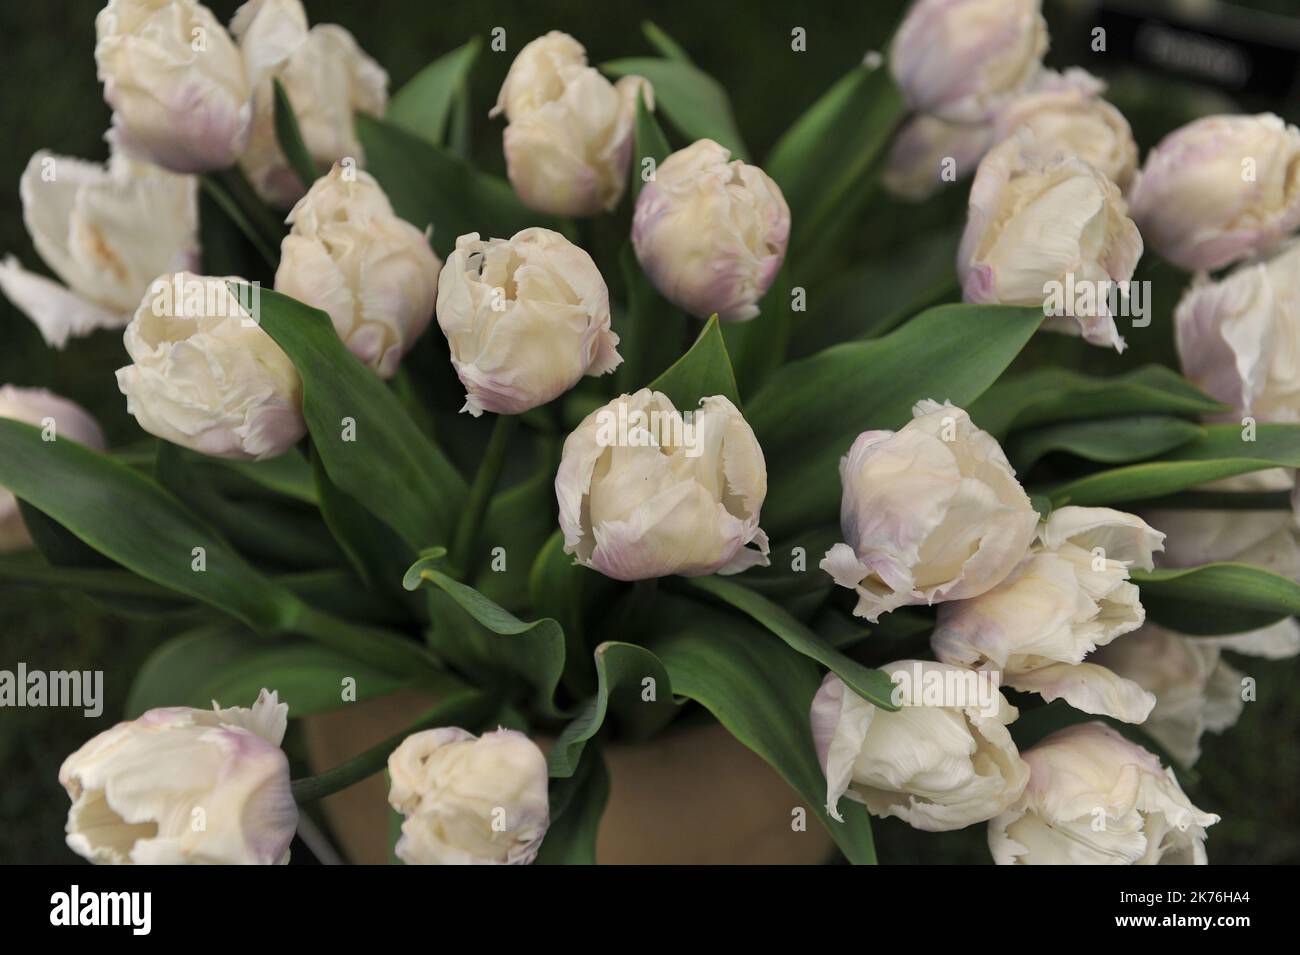 A bouquet of white with violet blush tulips (Tulipa) Snow Parrot on an exhibition in May Stock Photo